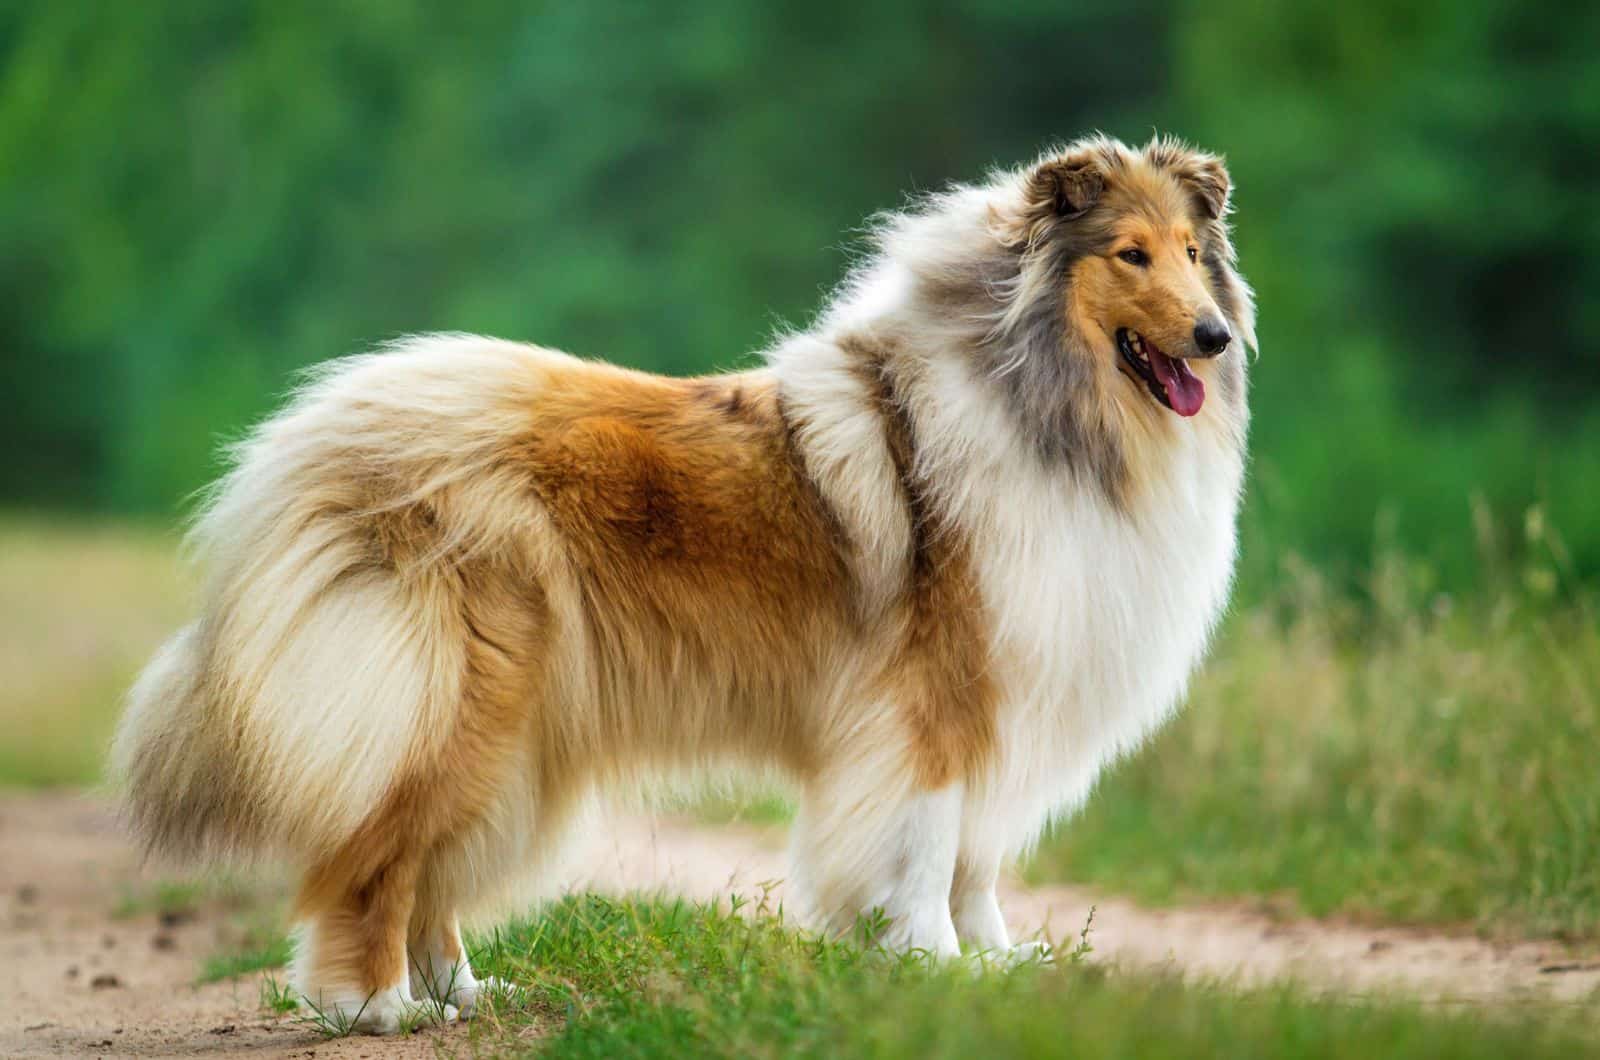 Rough Collie standing outside